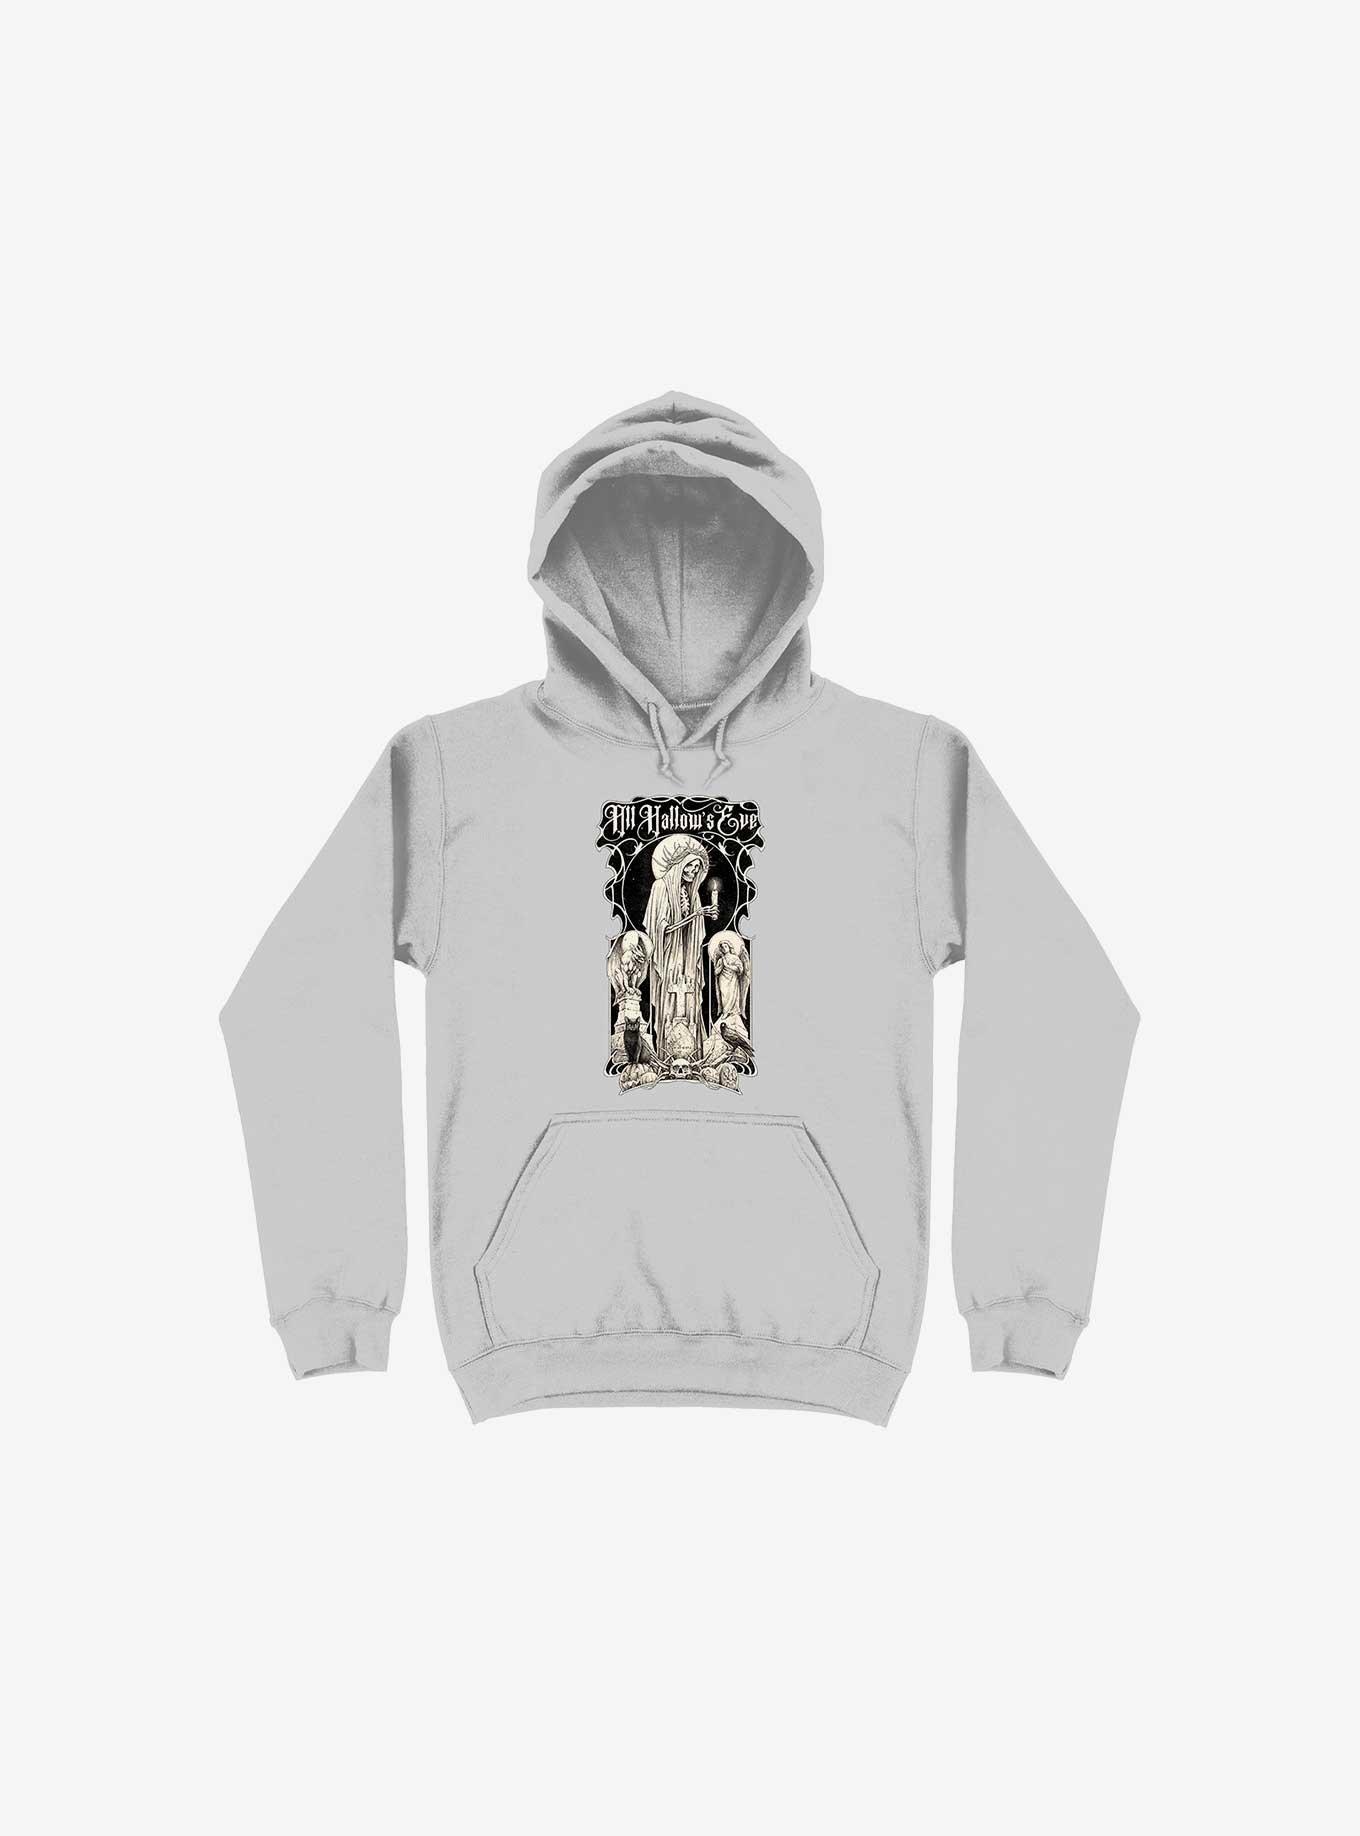 All Hallow's Eve Silver Hoodie, , hi-res